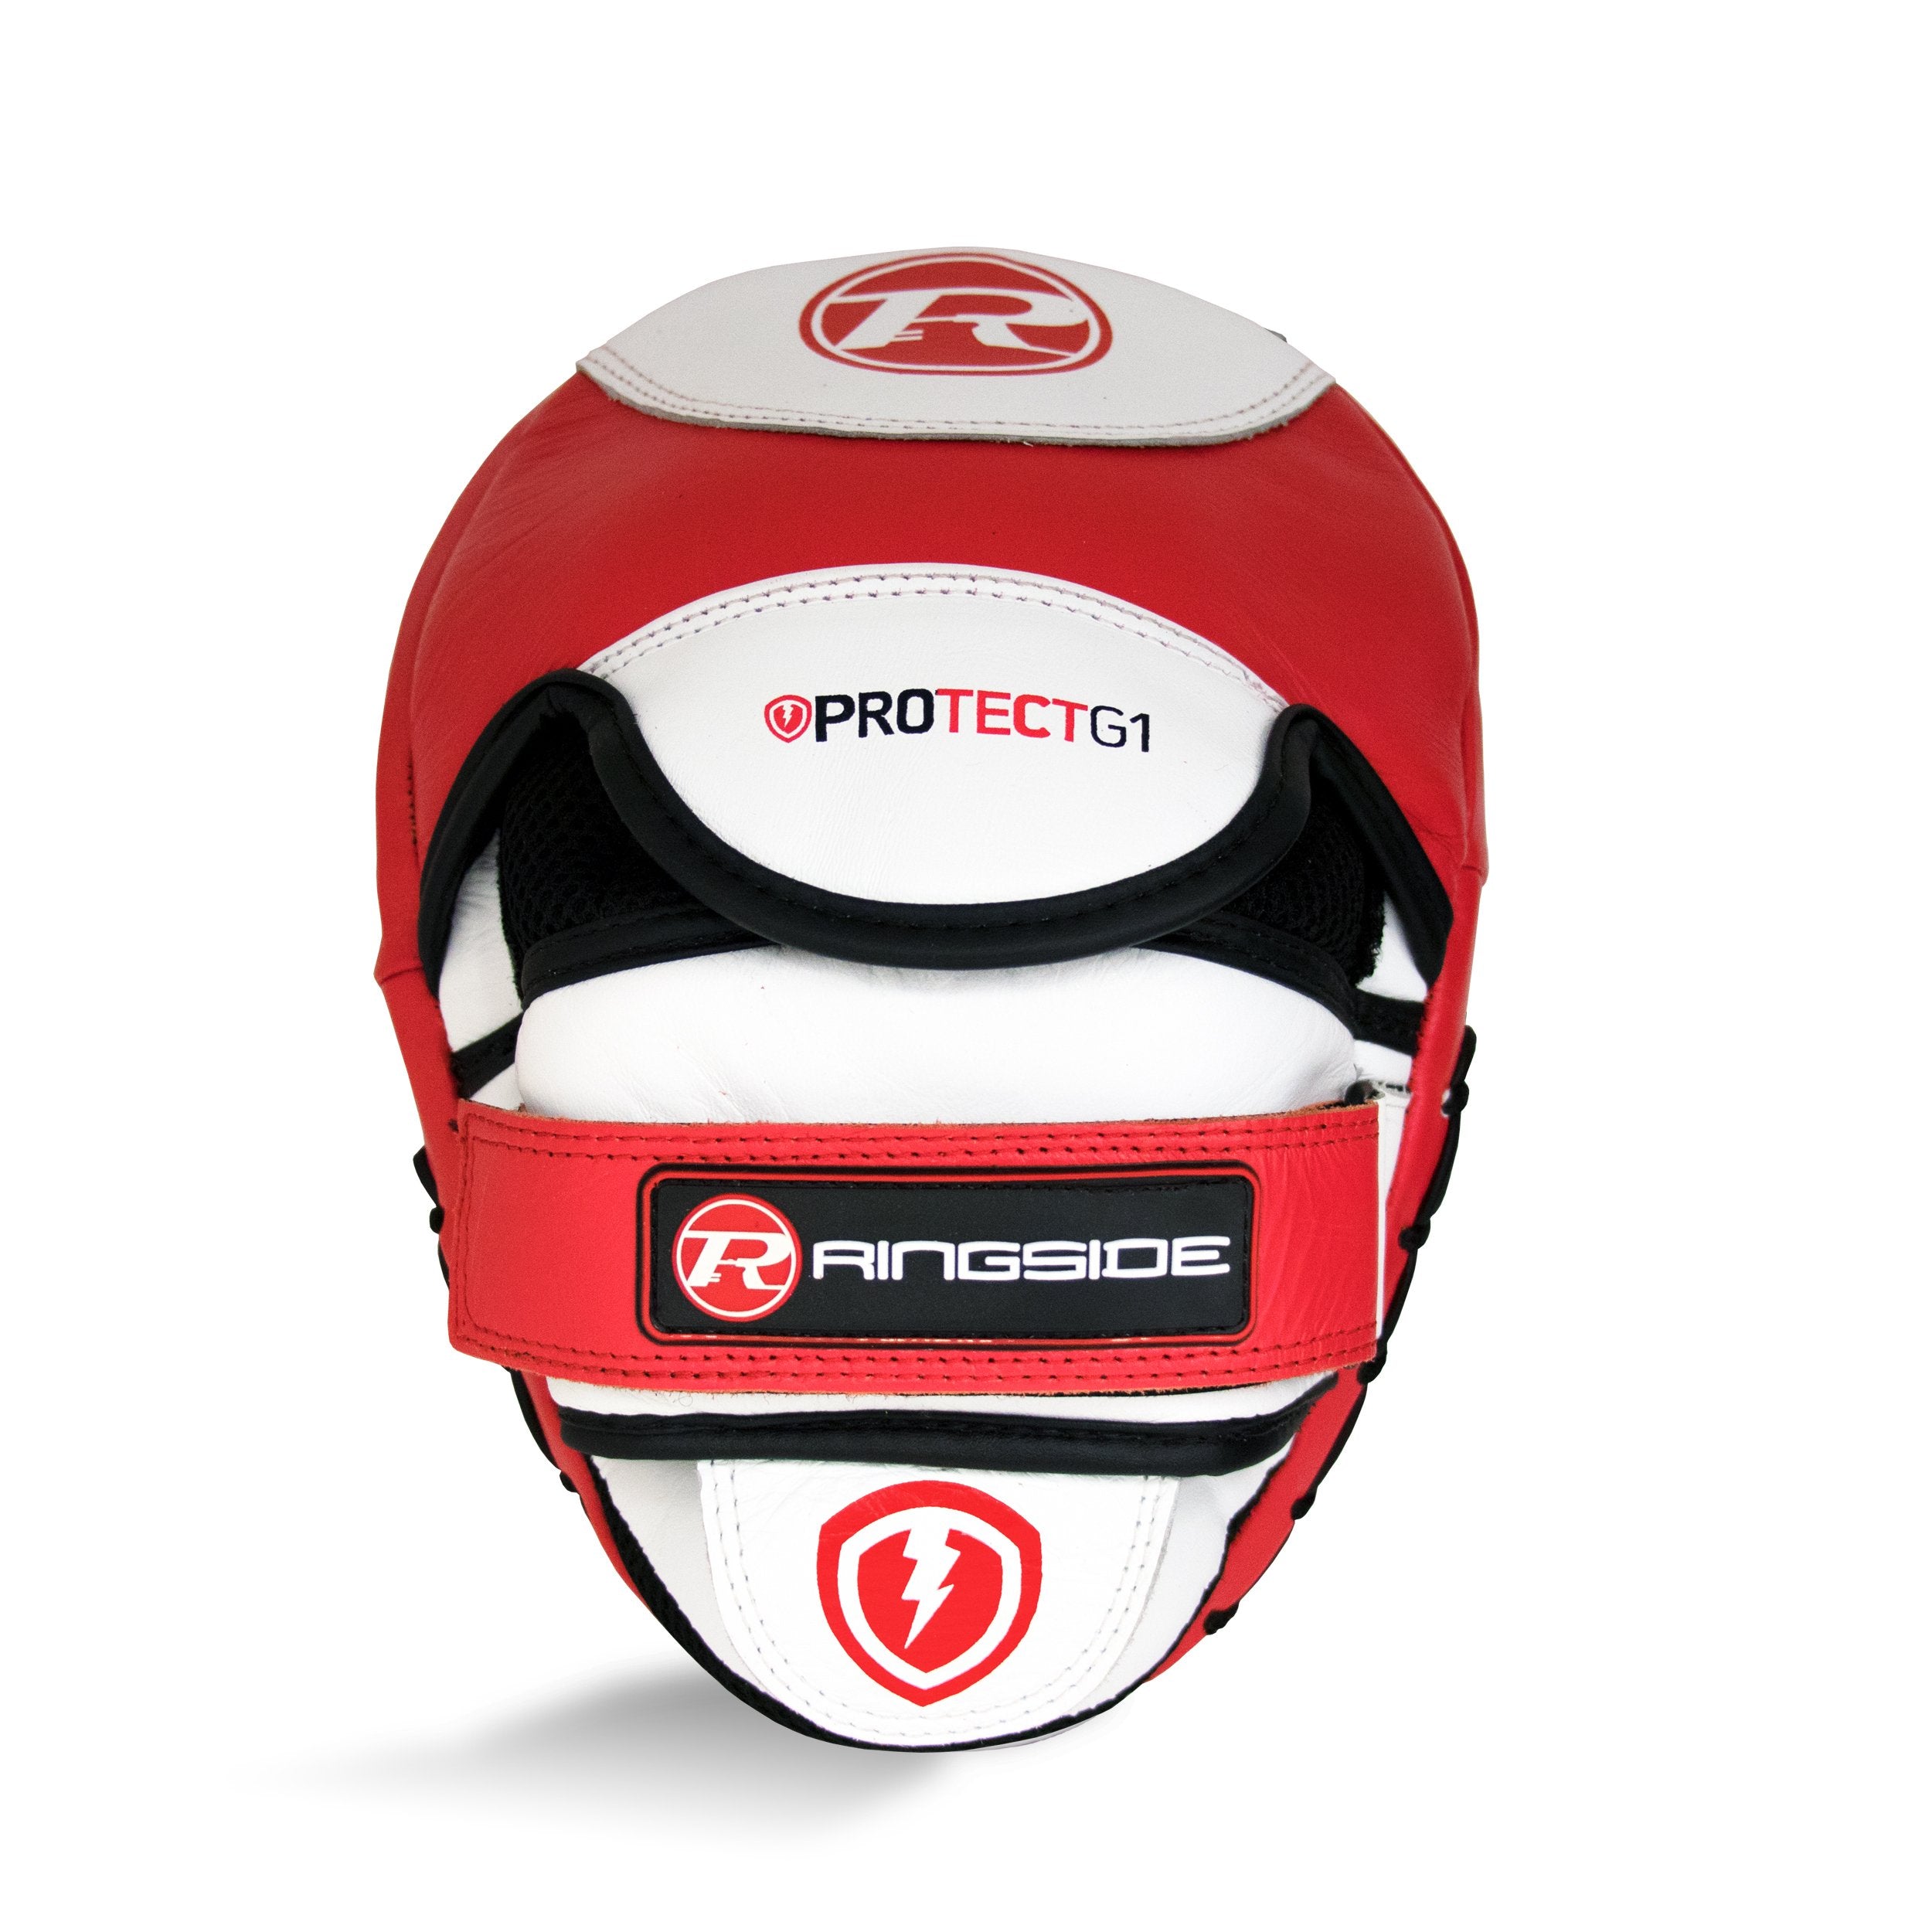 Protect G1 Hook & Jab Pads Red / White / Black